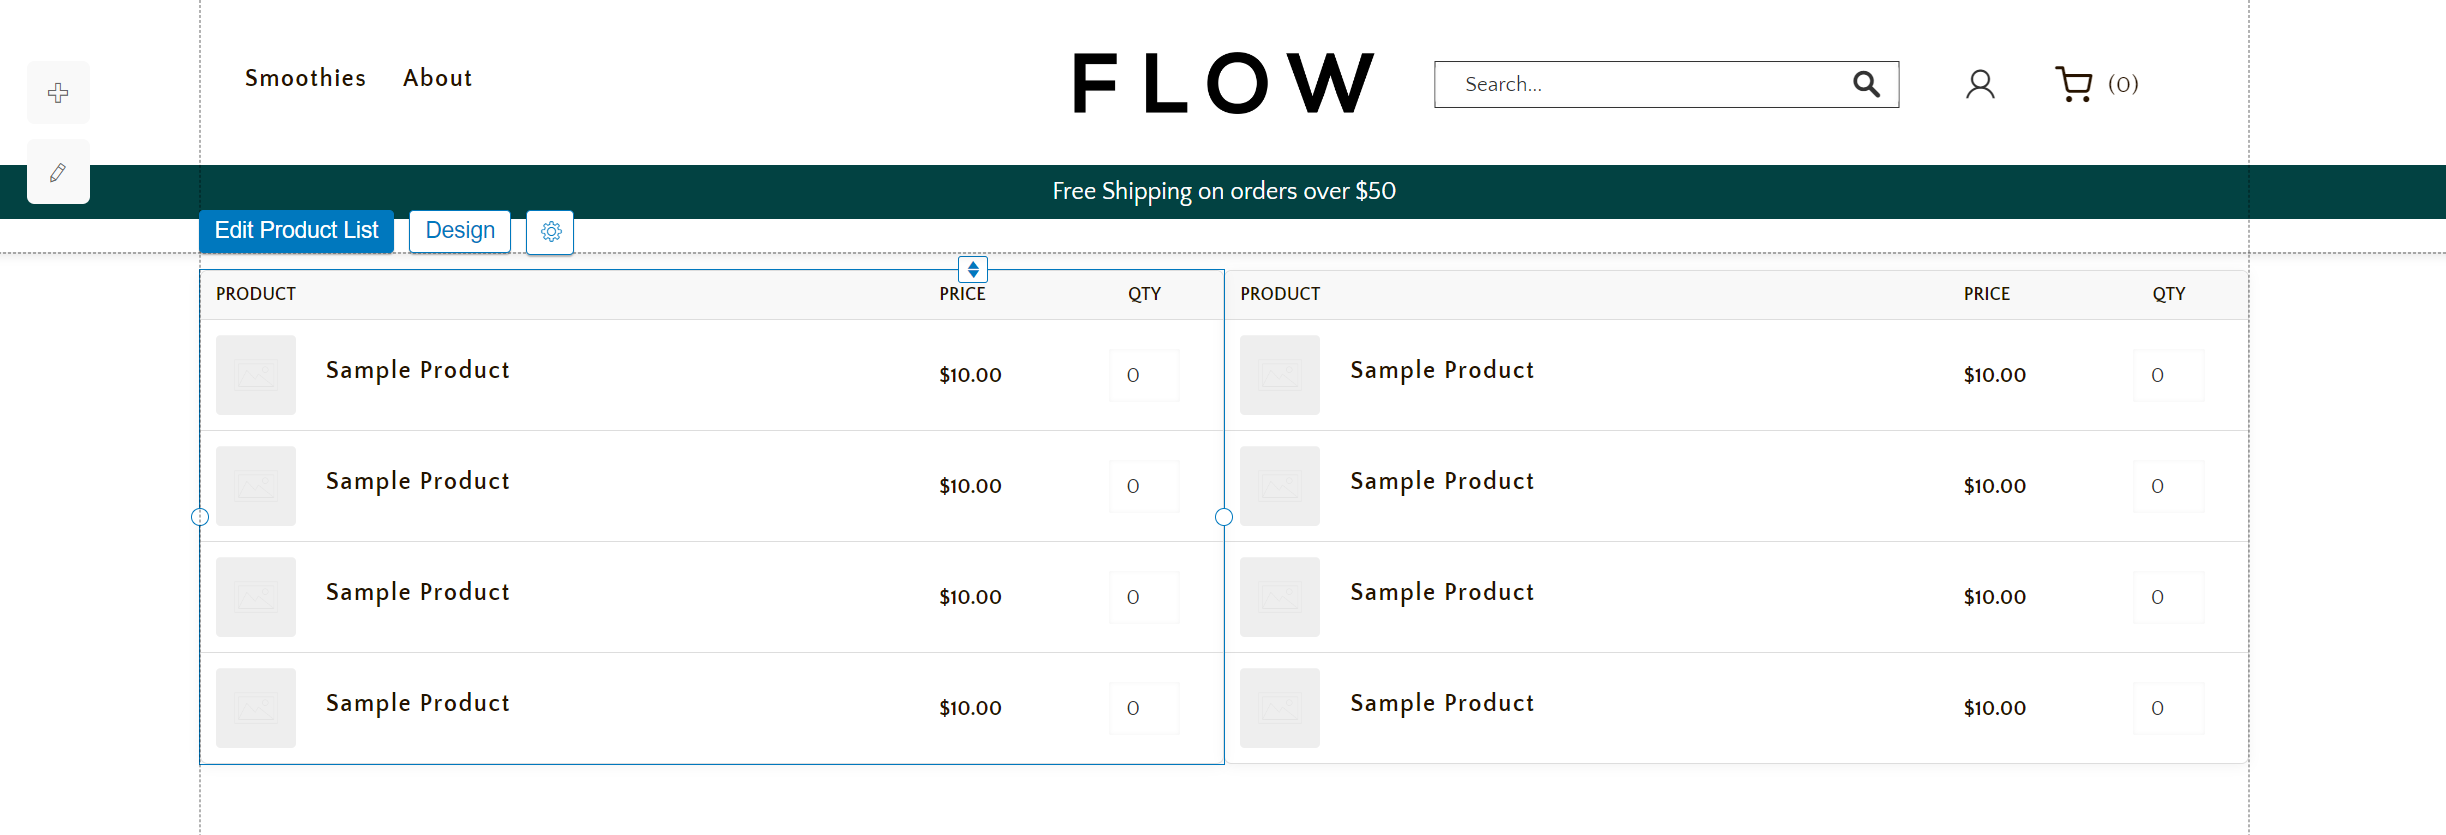 Example of Multiple Product Lists on one Page